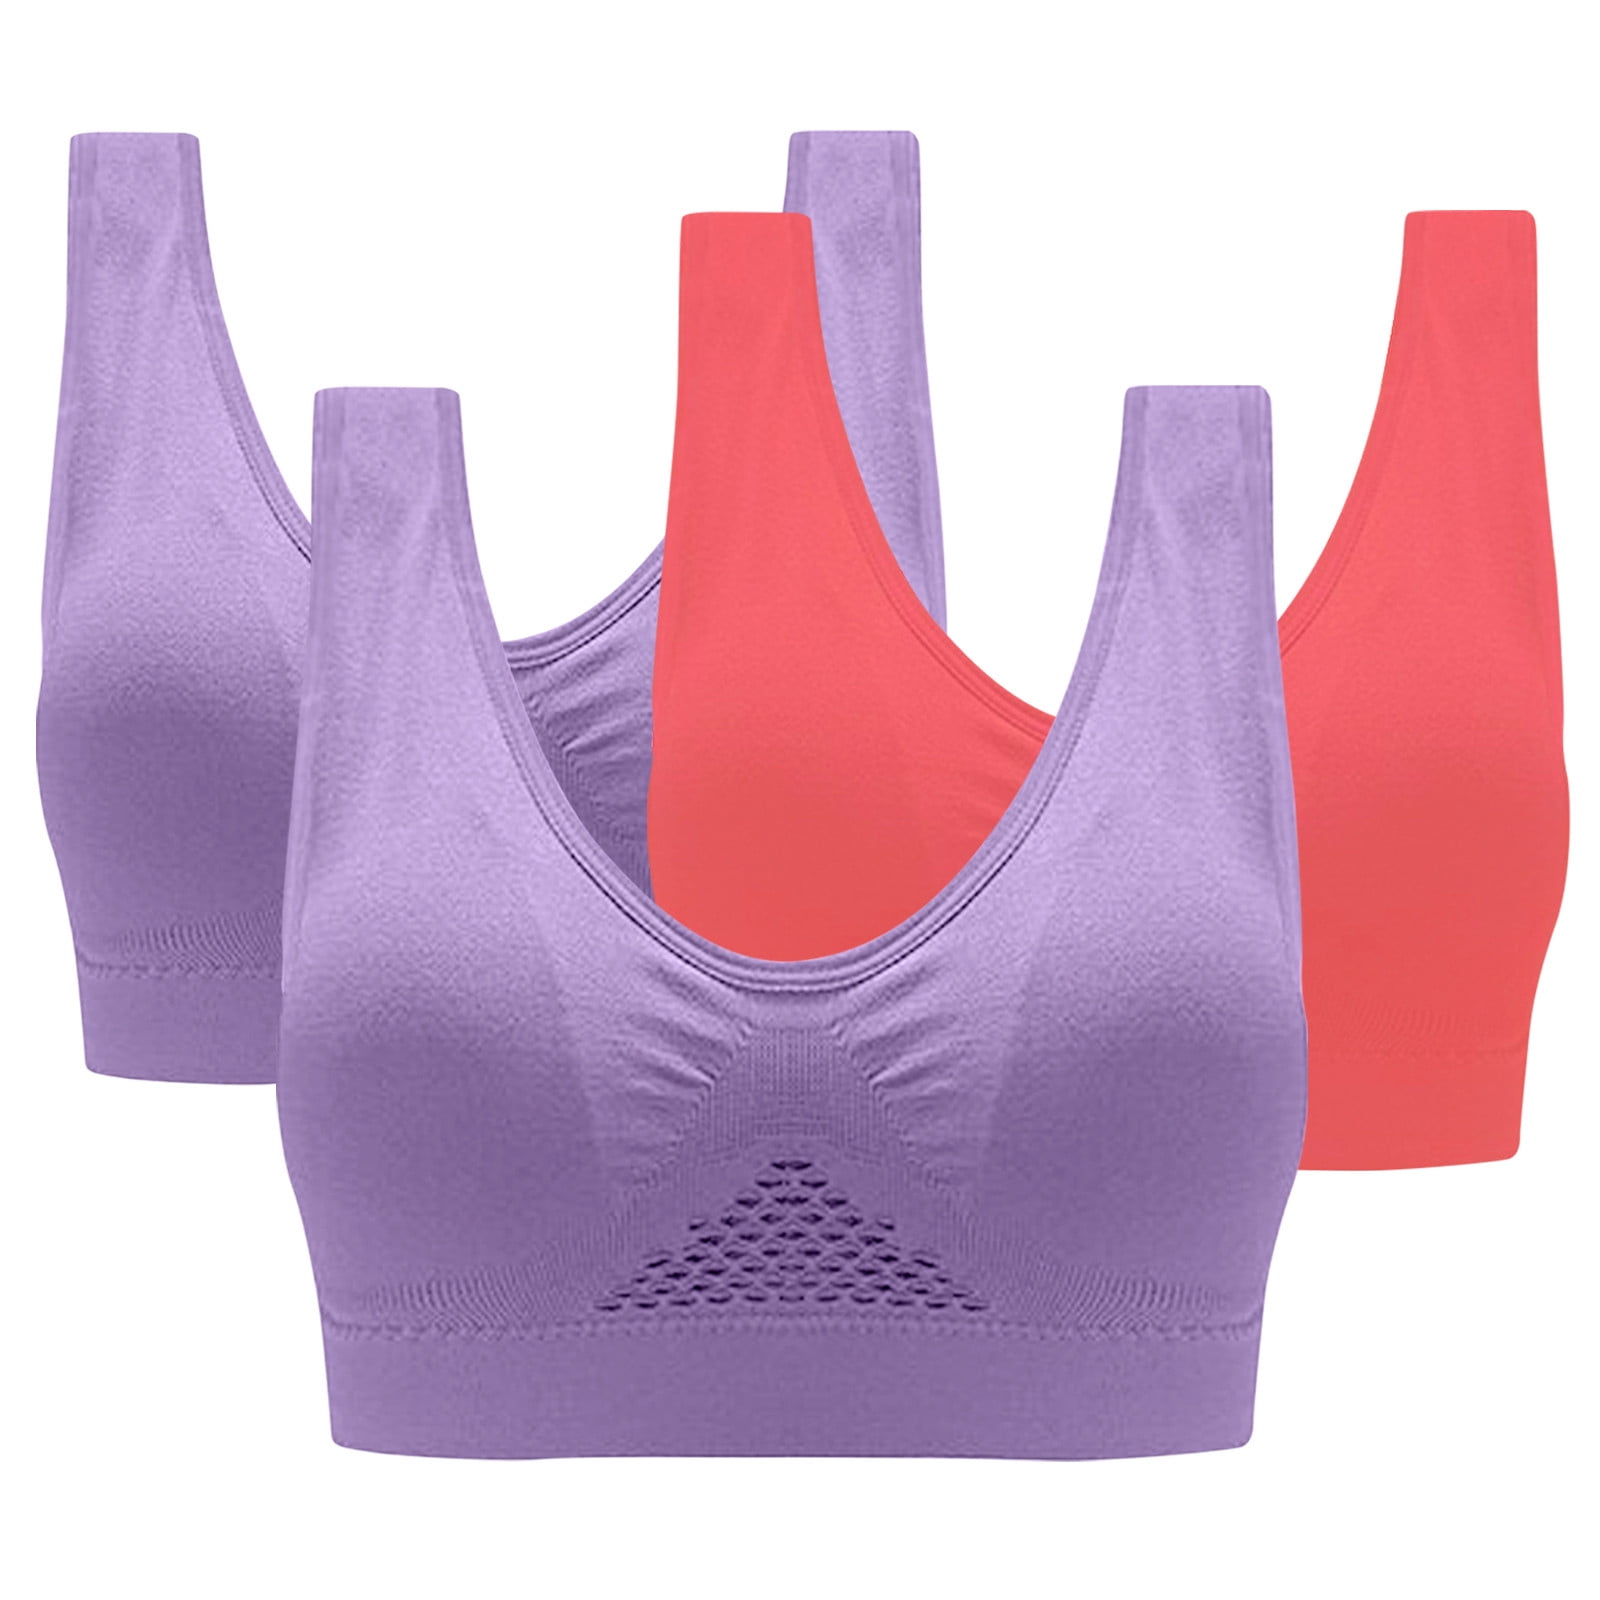 DISOLVE Women's High Impact Underwire Sports Bra with Adjustable Straps  Full Figure Running Workout Free Size (28 Till 34) Pack of 1 Peach Color